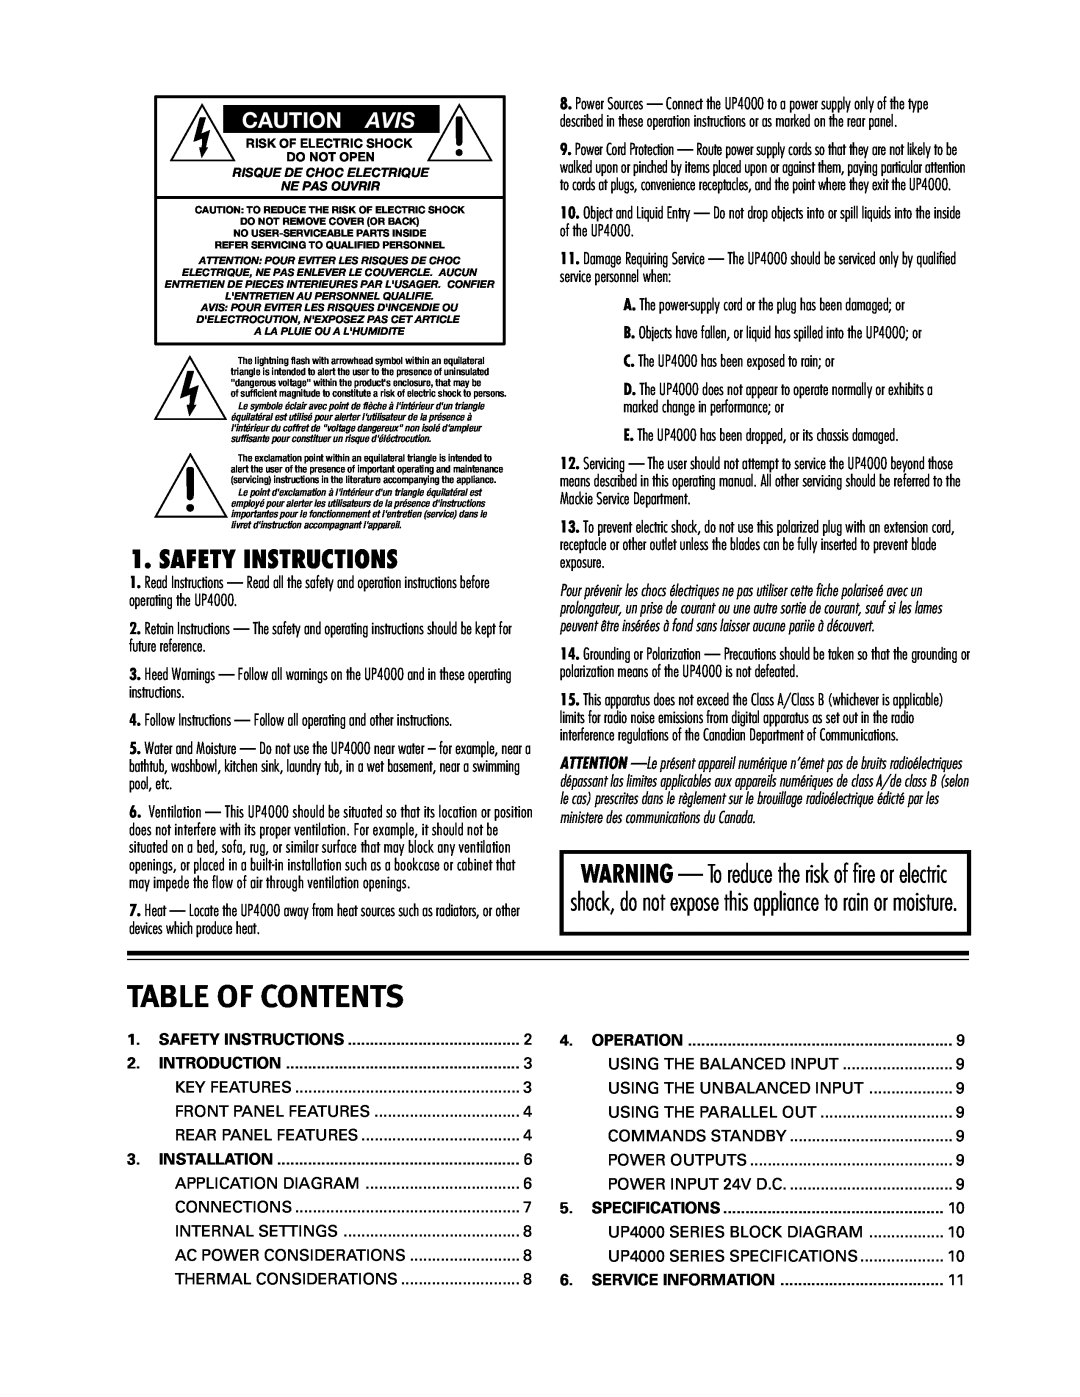 Mackie UP4061 Table Of Contents, Safety Instructions, Caution Avis, Introduction, Installation, Operation, Specifications 